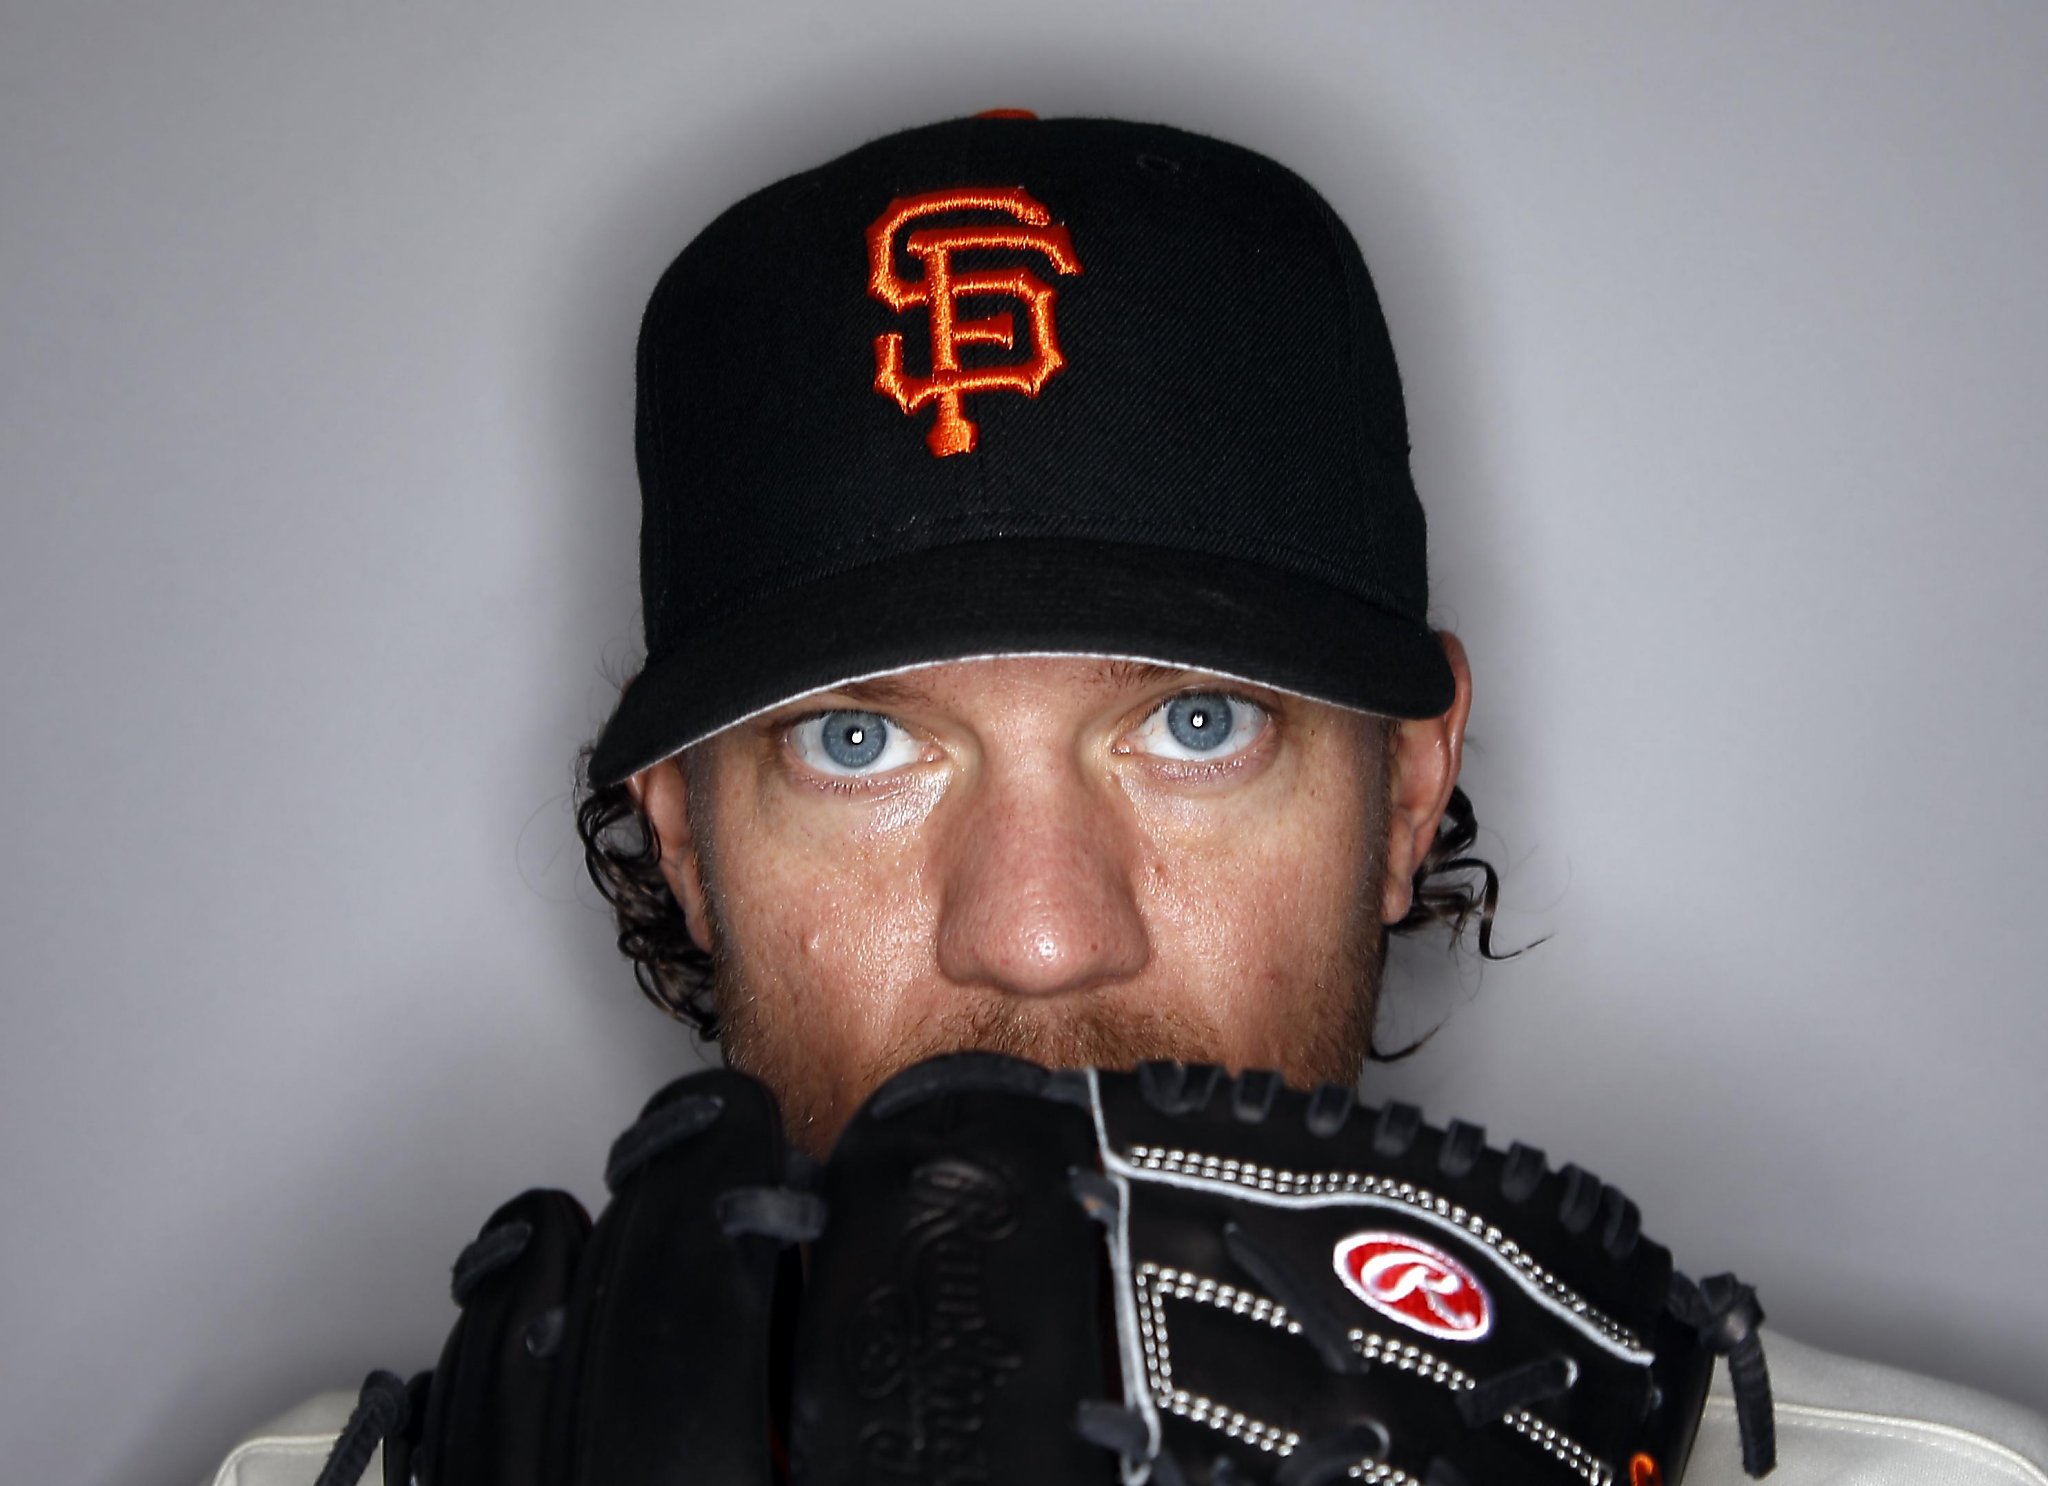 Giants get Jake Peavy from Red Sox - Los Angeles Times